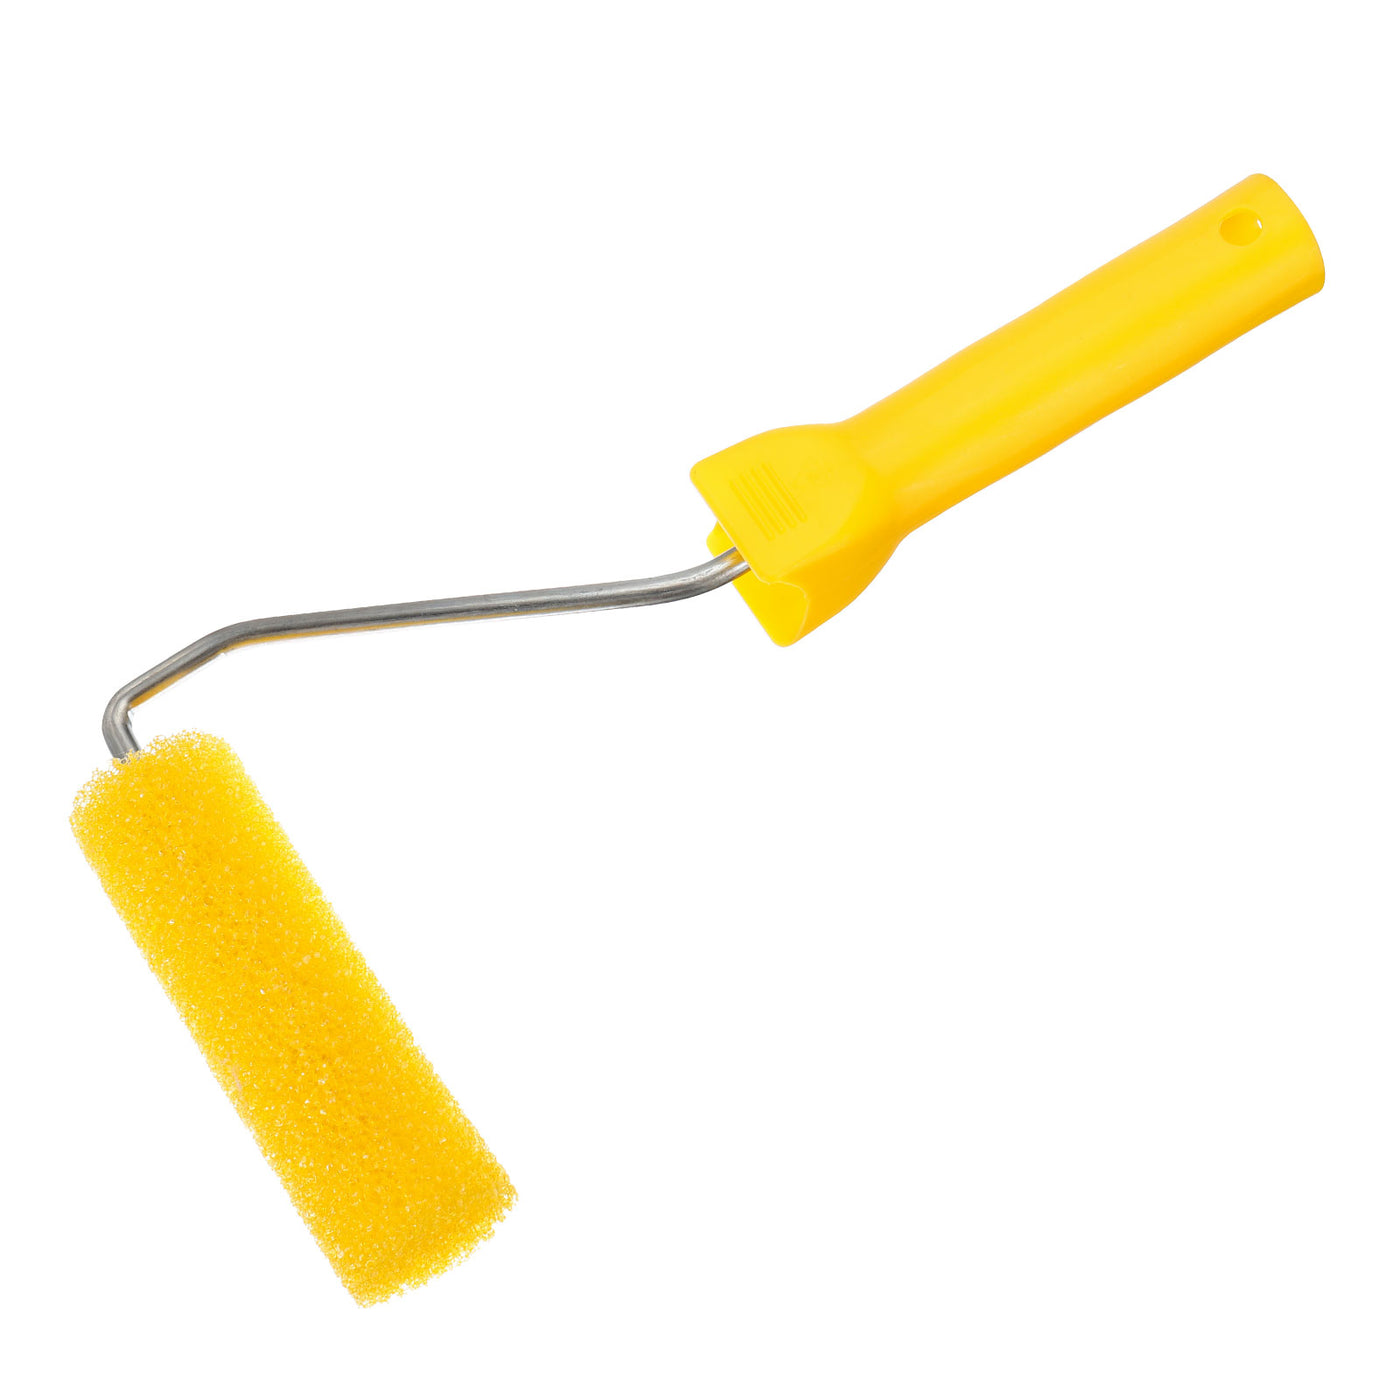 uxcell Uxcell 3Pcs Paint Roller Kit, 2Pcs 4" Sponge Roller Covers and 10" Length Roller Frame